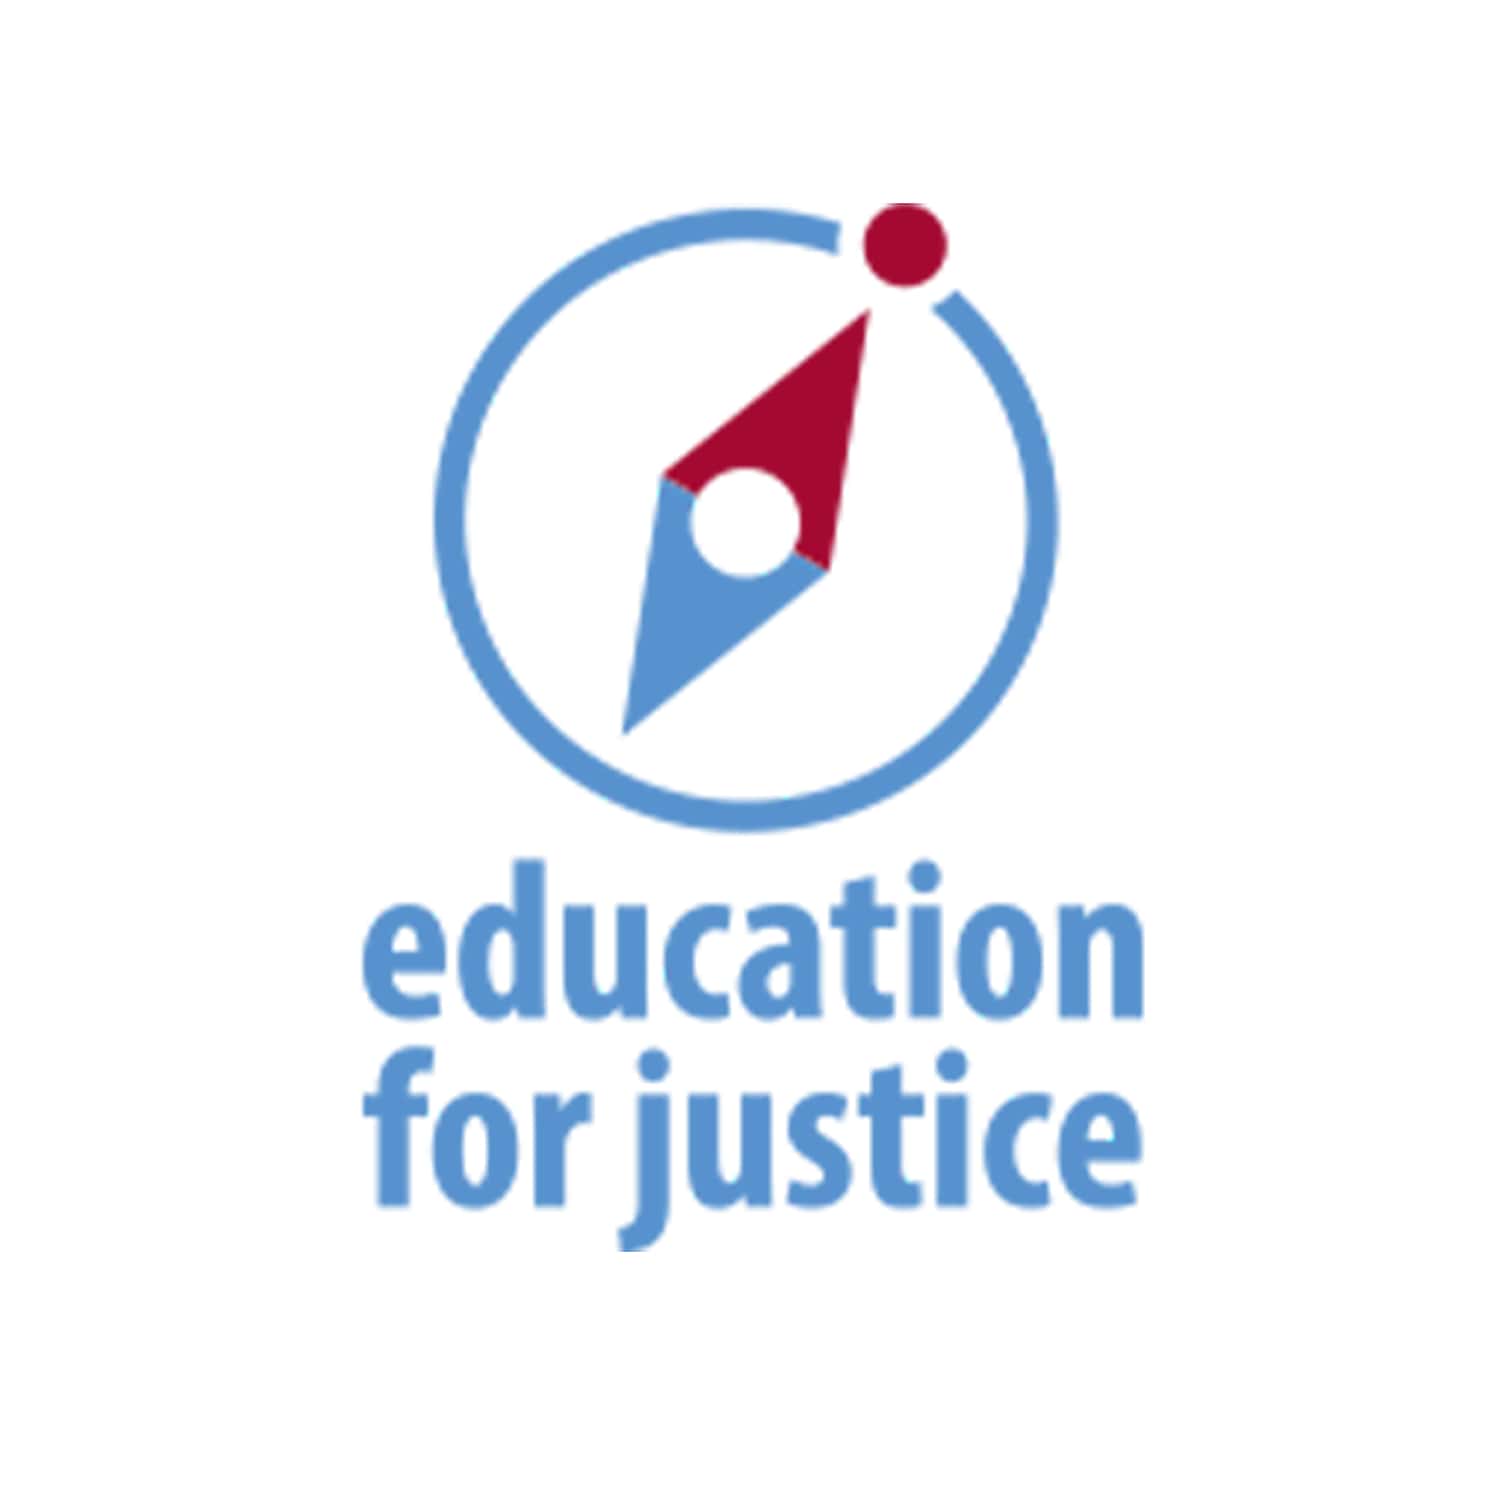 Education for Justice Initiative by UNODC